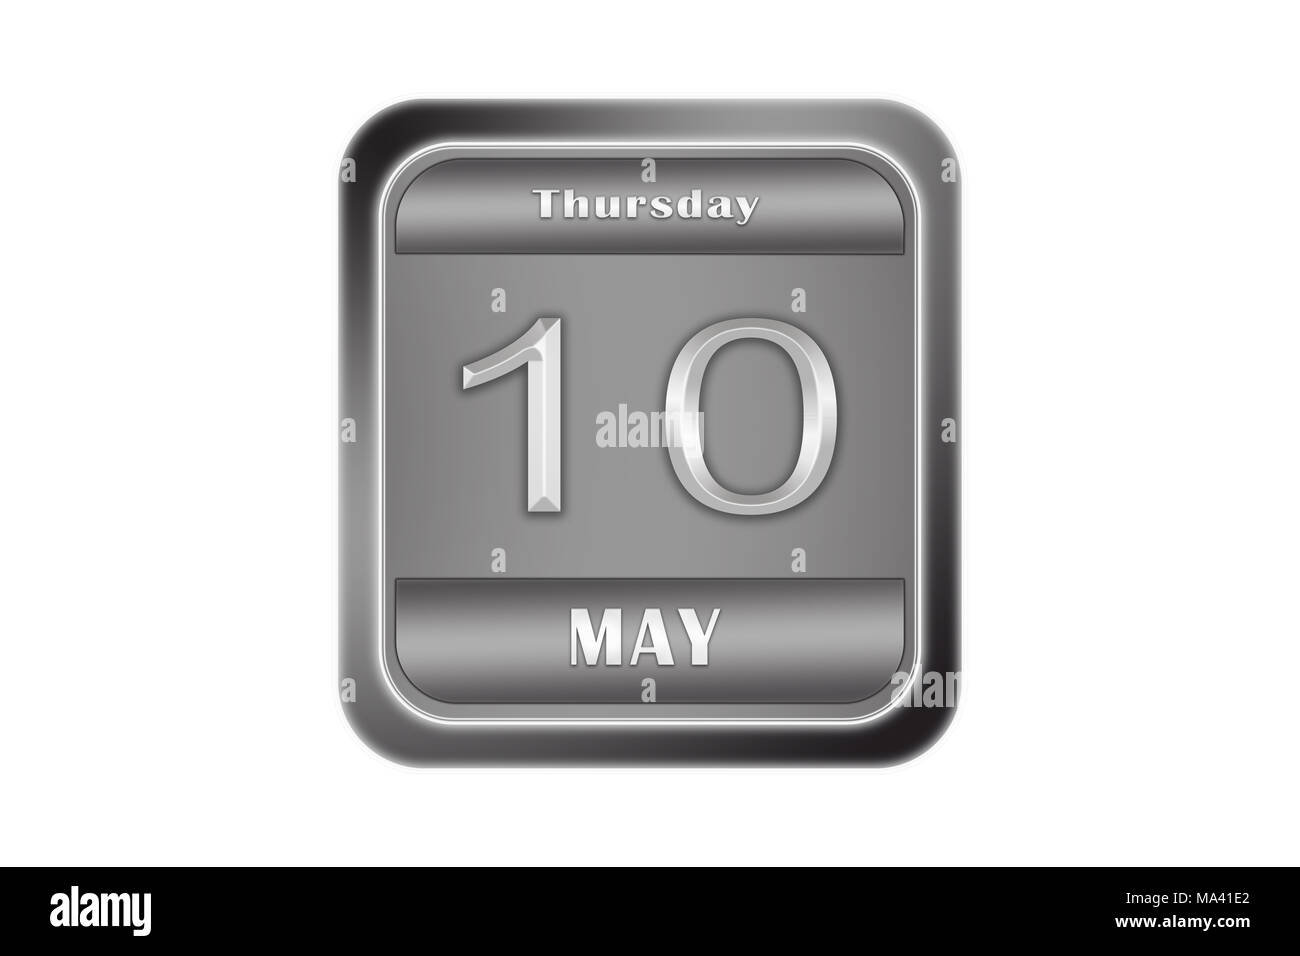 Date may 10, Thursday written on a metal plate Stock Photo